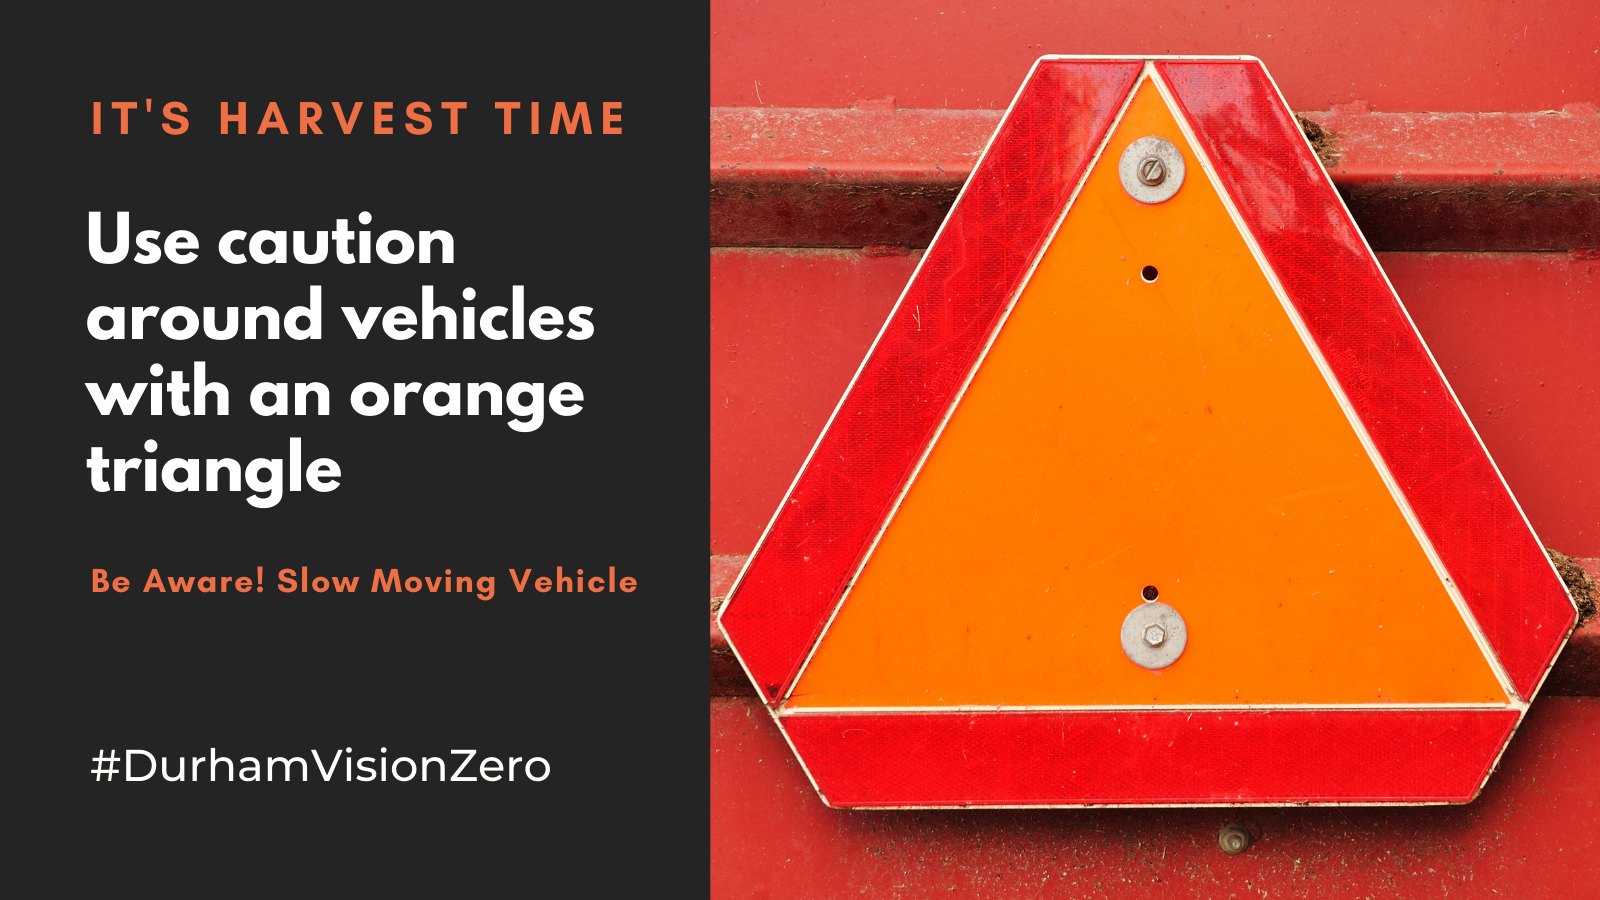 Image of orange triangle with a red frame around it with text saying, “It’s Harvest Time. Use caution around vehicles with an orange triangle. Be aware of slow moving vehicles. #DurhamVisionZero.”